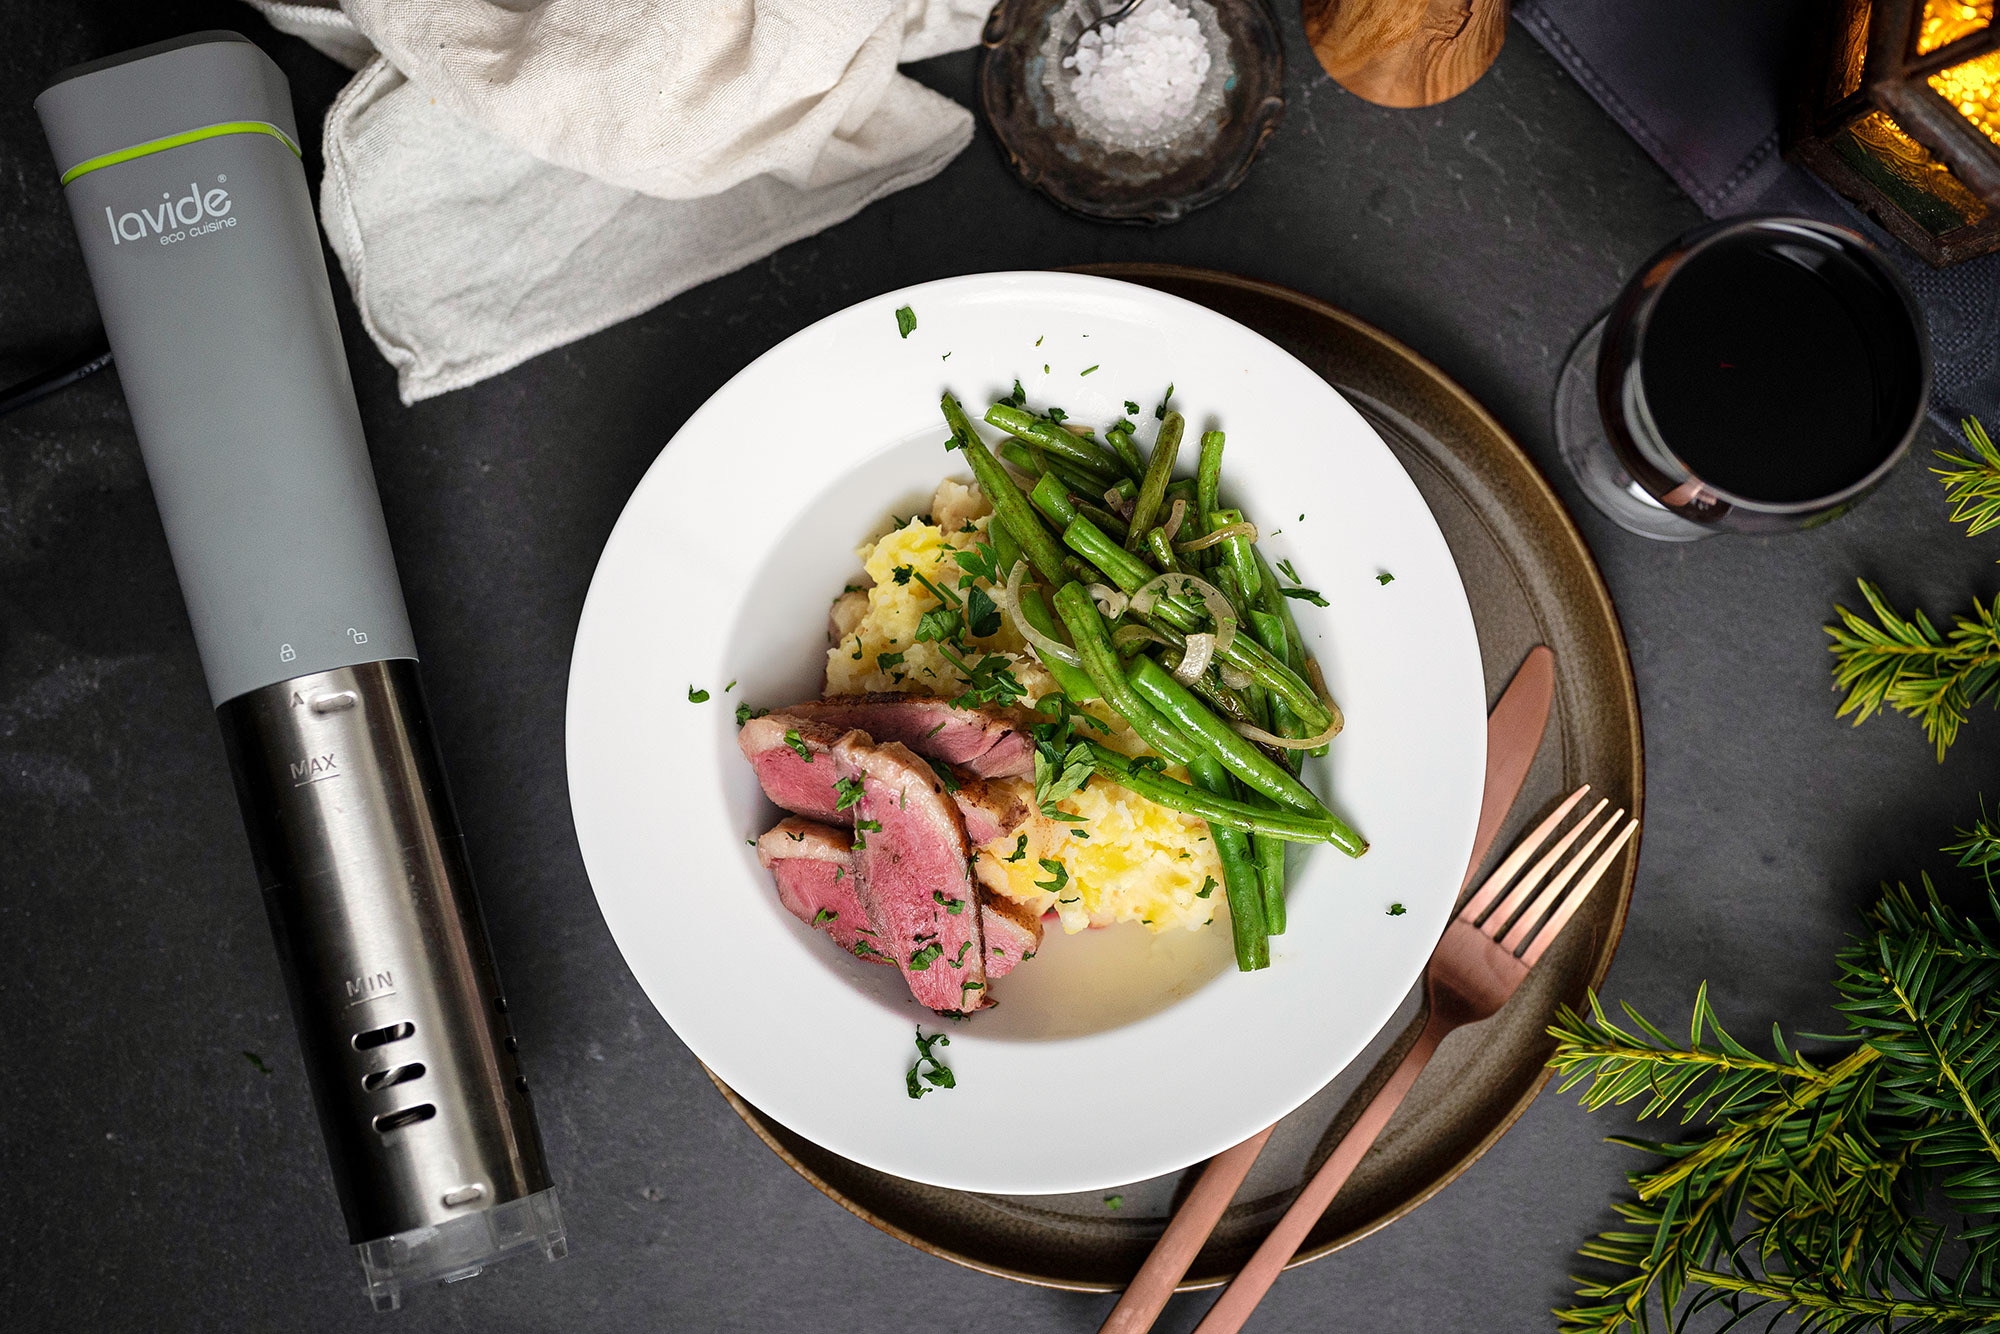 Sous-vide cooked duck breast with potato-celery mash and green beans as a side